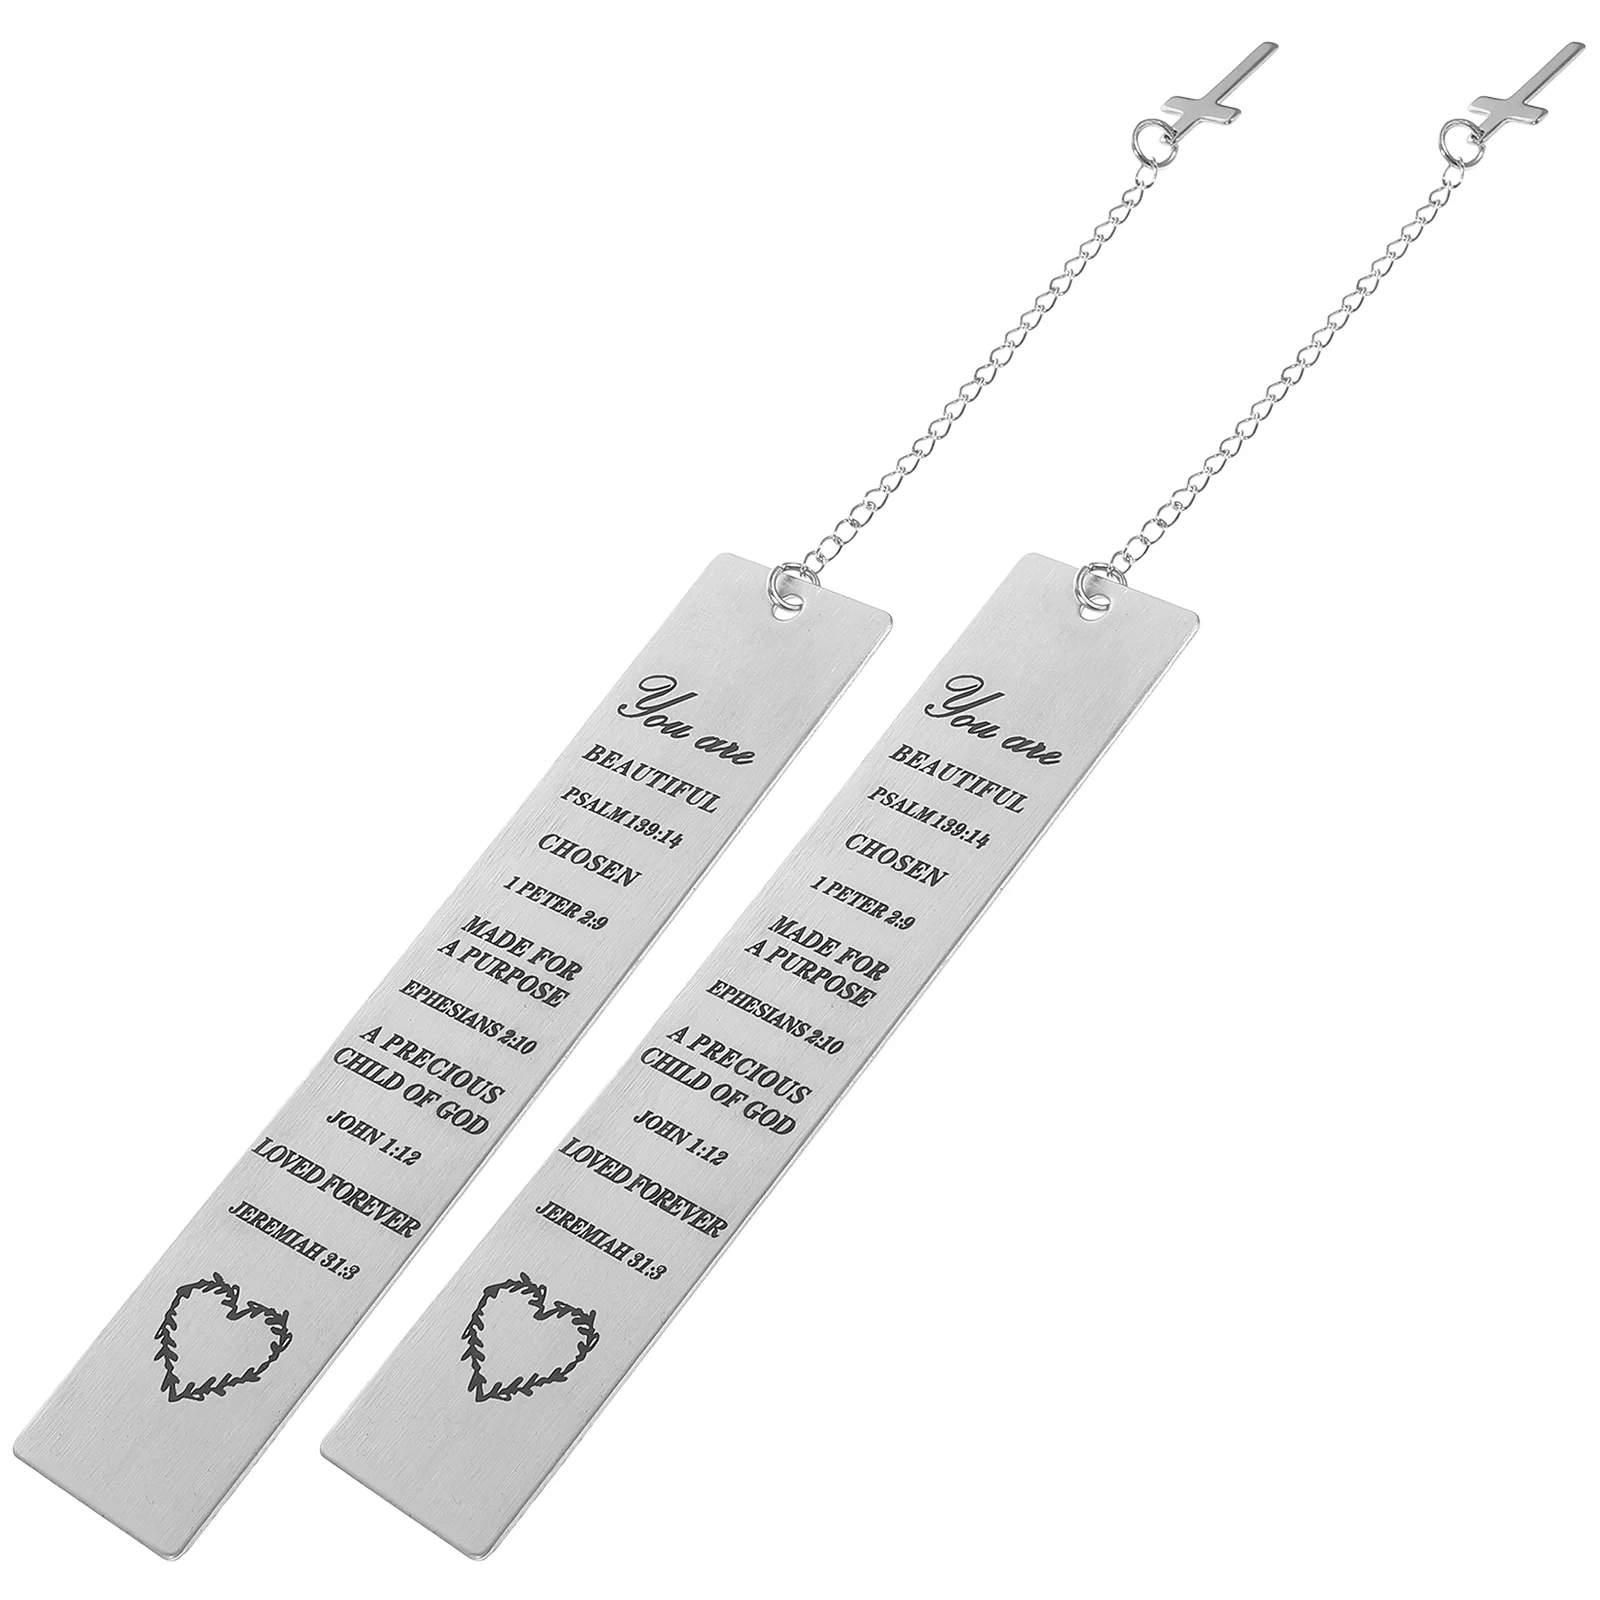 

2 Pcs Remembrance Gifts Creative Bookmark for Student Lovers Girl Reader Iron Page Marker Bookmarks Teens Child